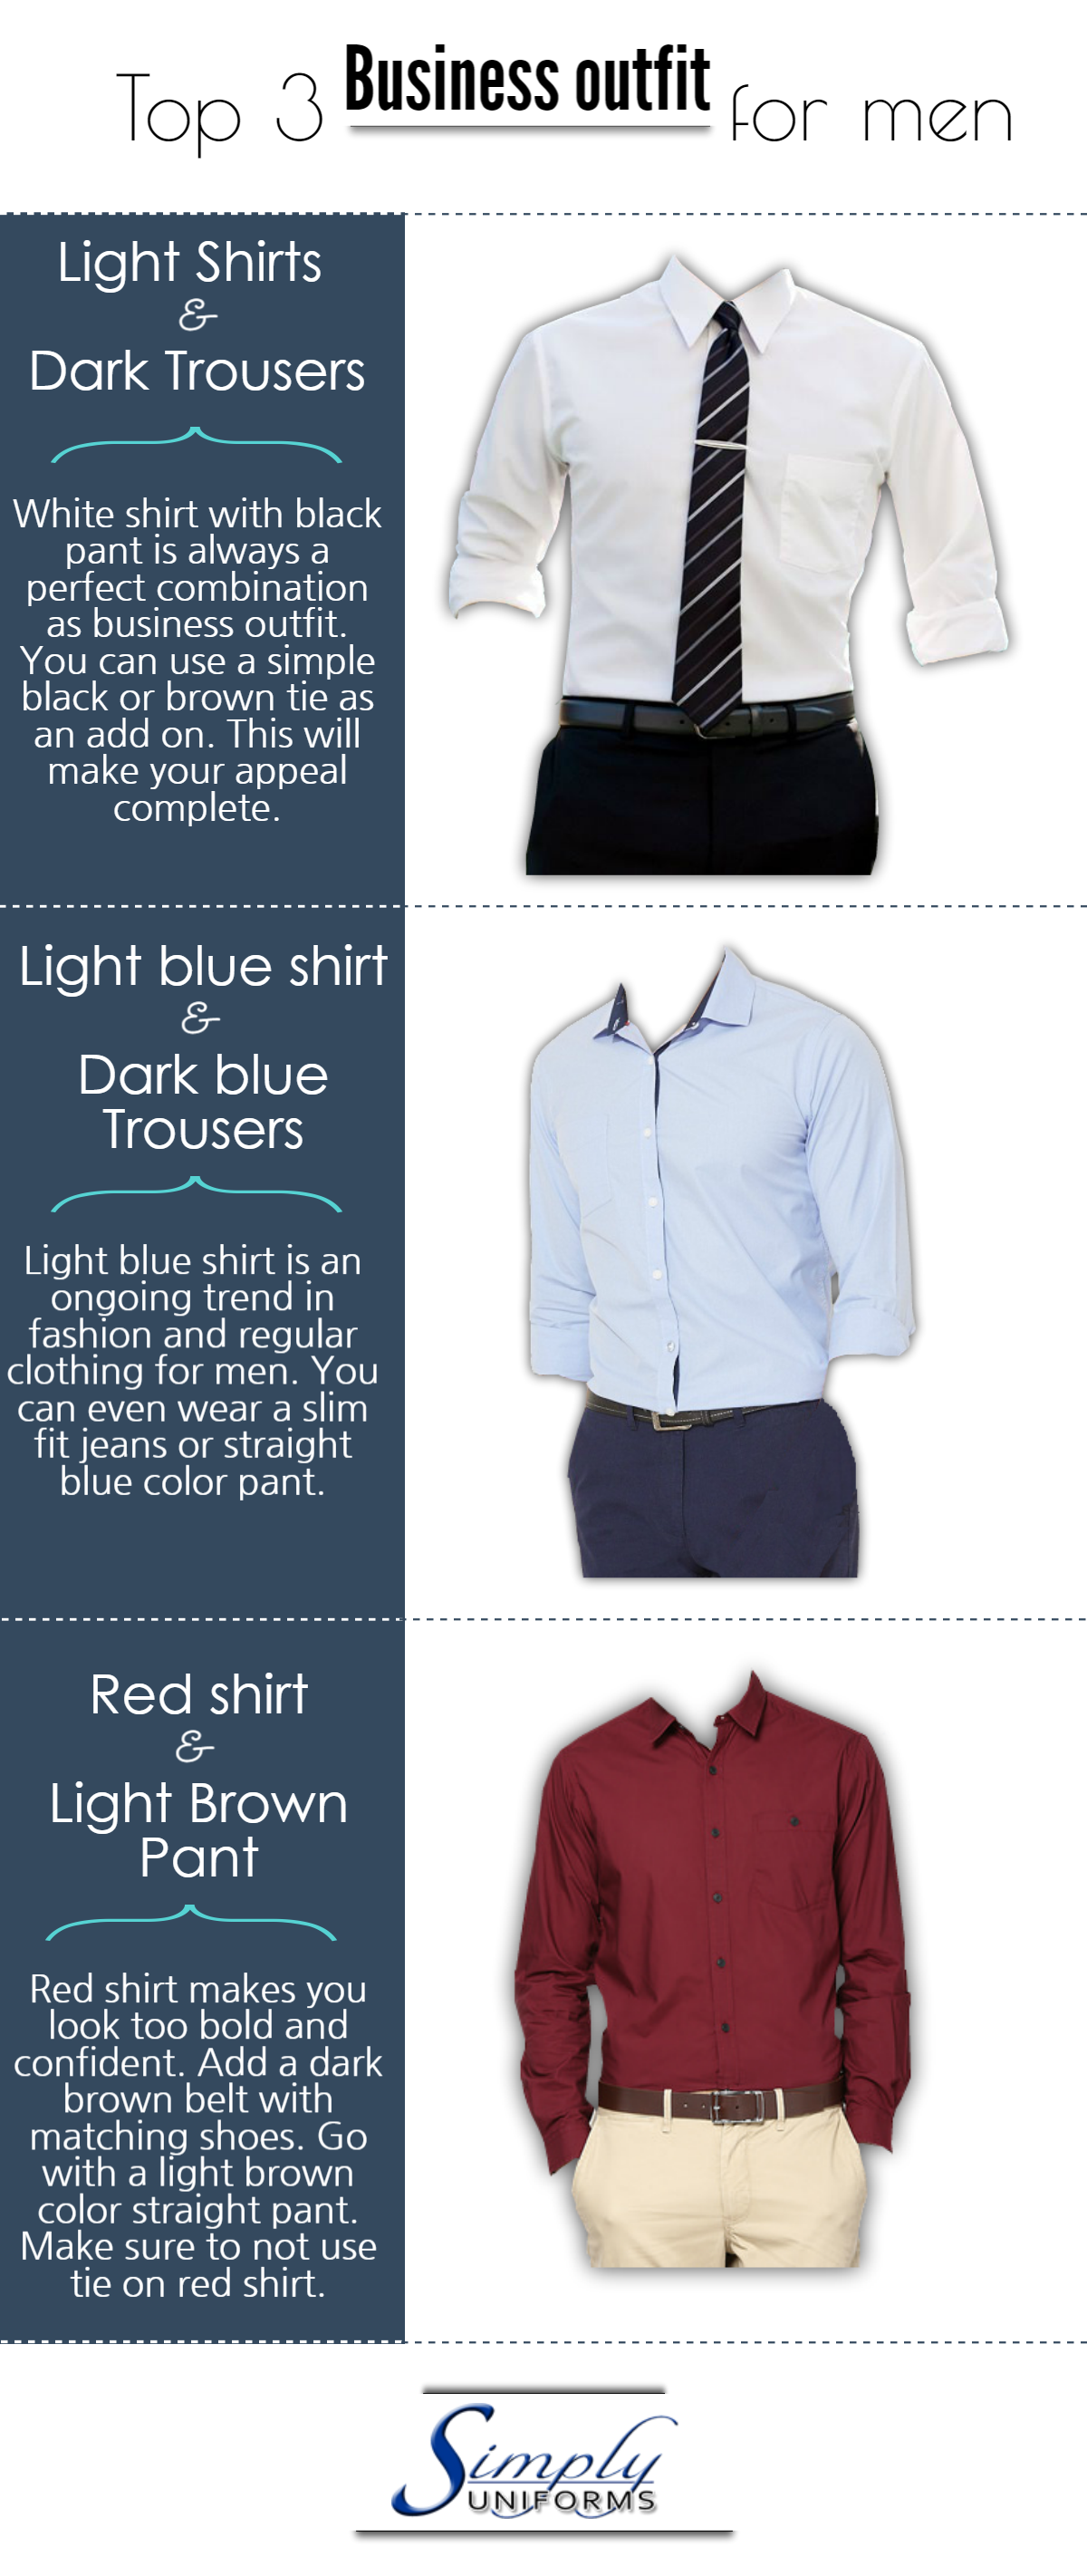 Top 3 Business Outfit for Men | Visual.ly